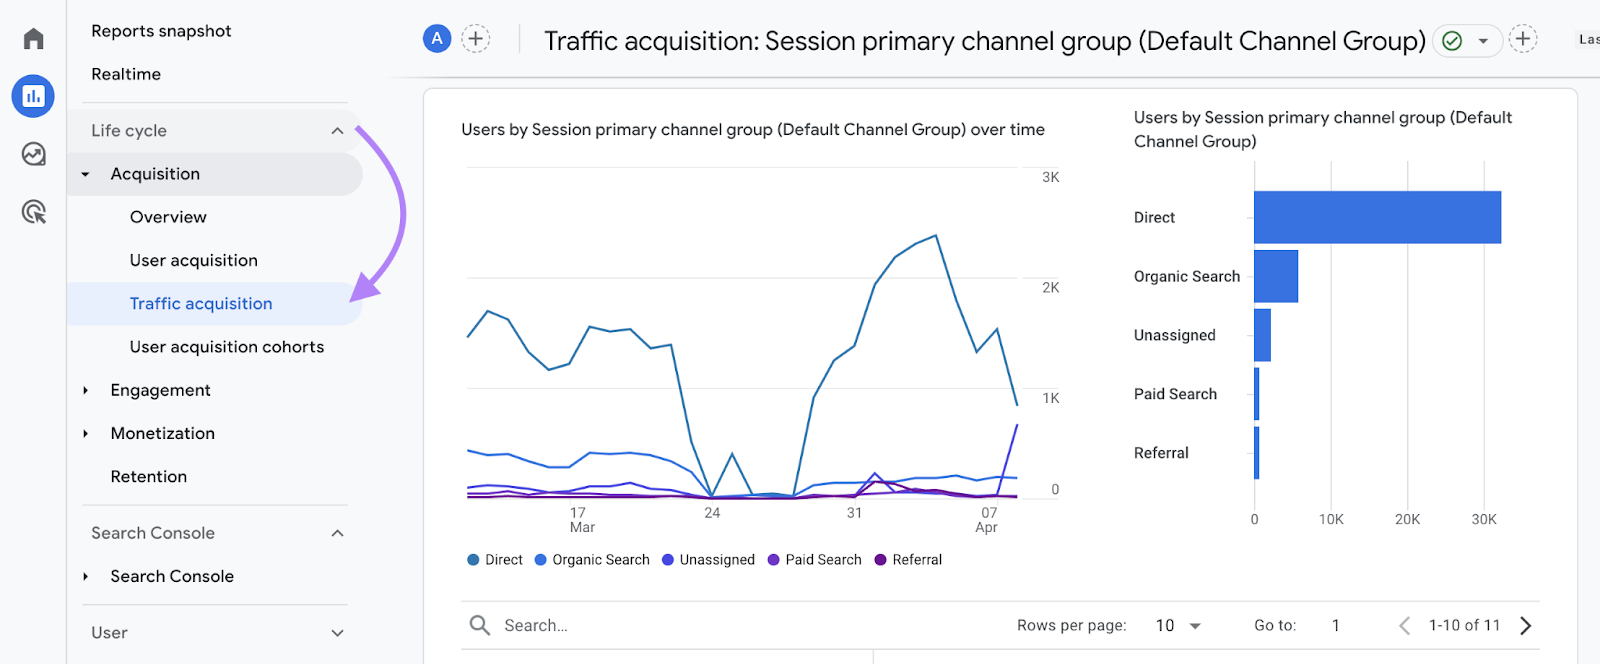 Charts showing traffic by channel like direct, organic search, and referral over time